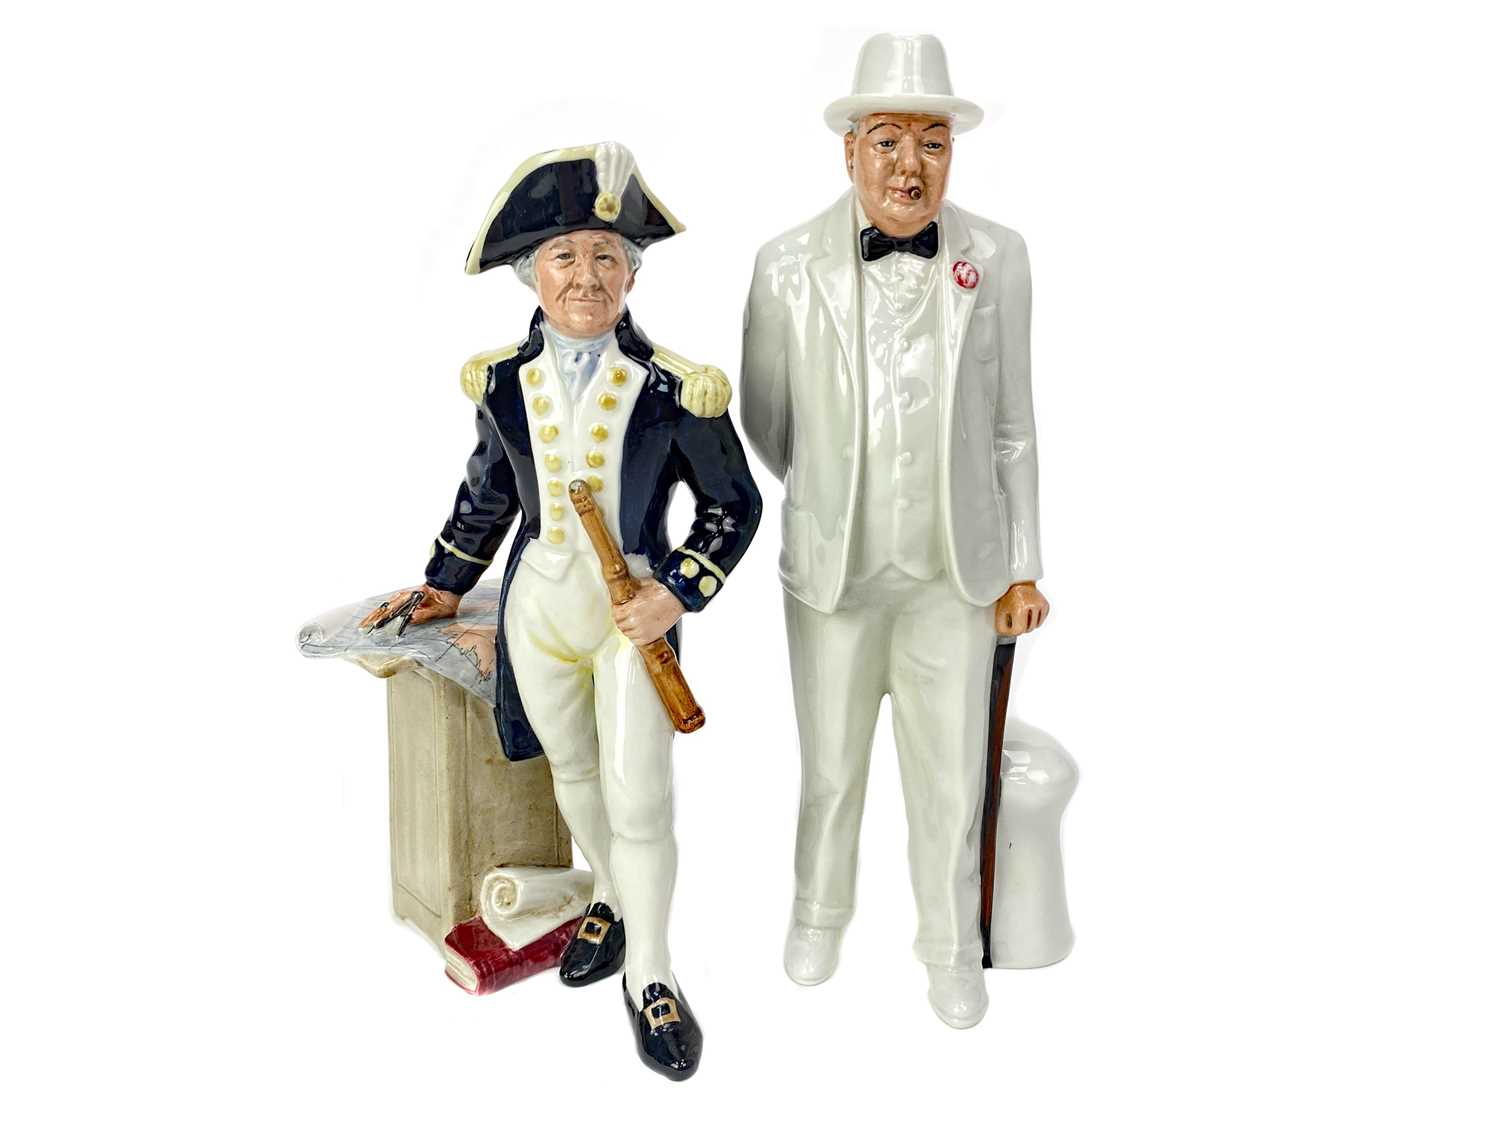 Lot 1003 - A ROYAL DOULTON FIGURE OF 'SIR WINSTON CHURCHILL' AND ANOTHER OF 'THE CAPTAIN'